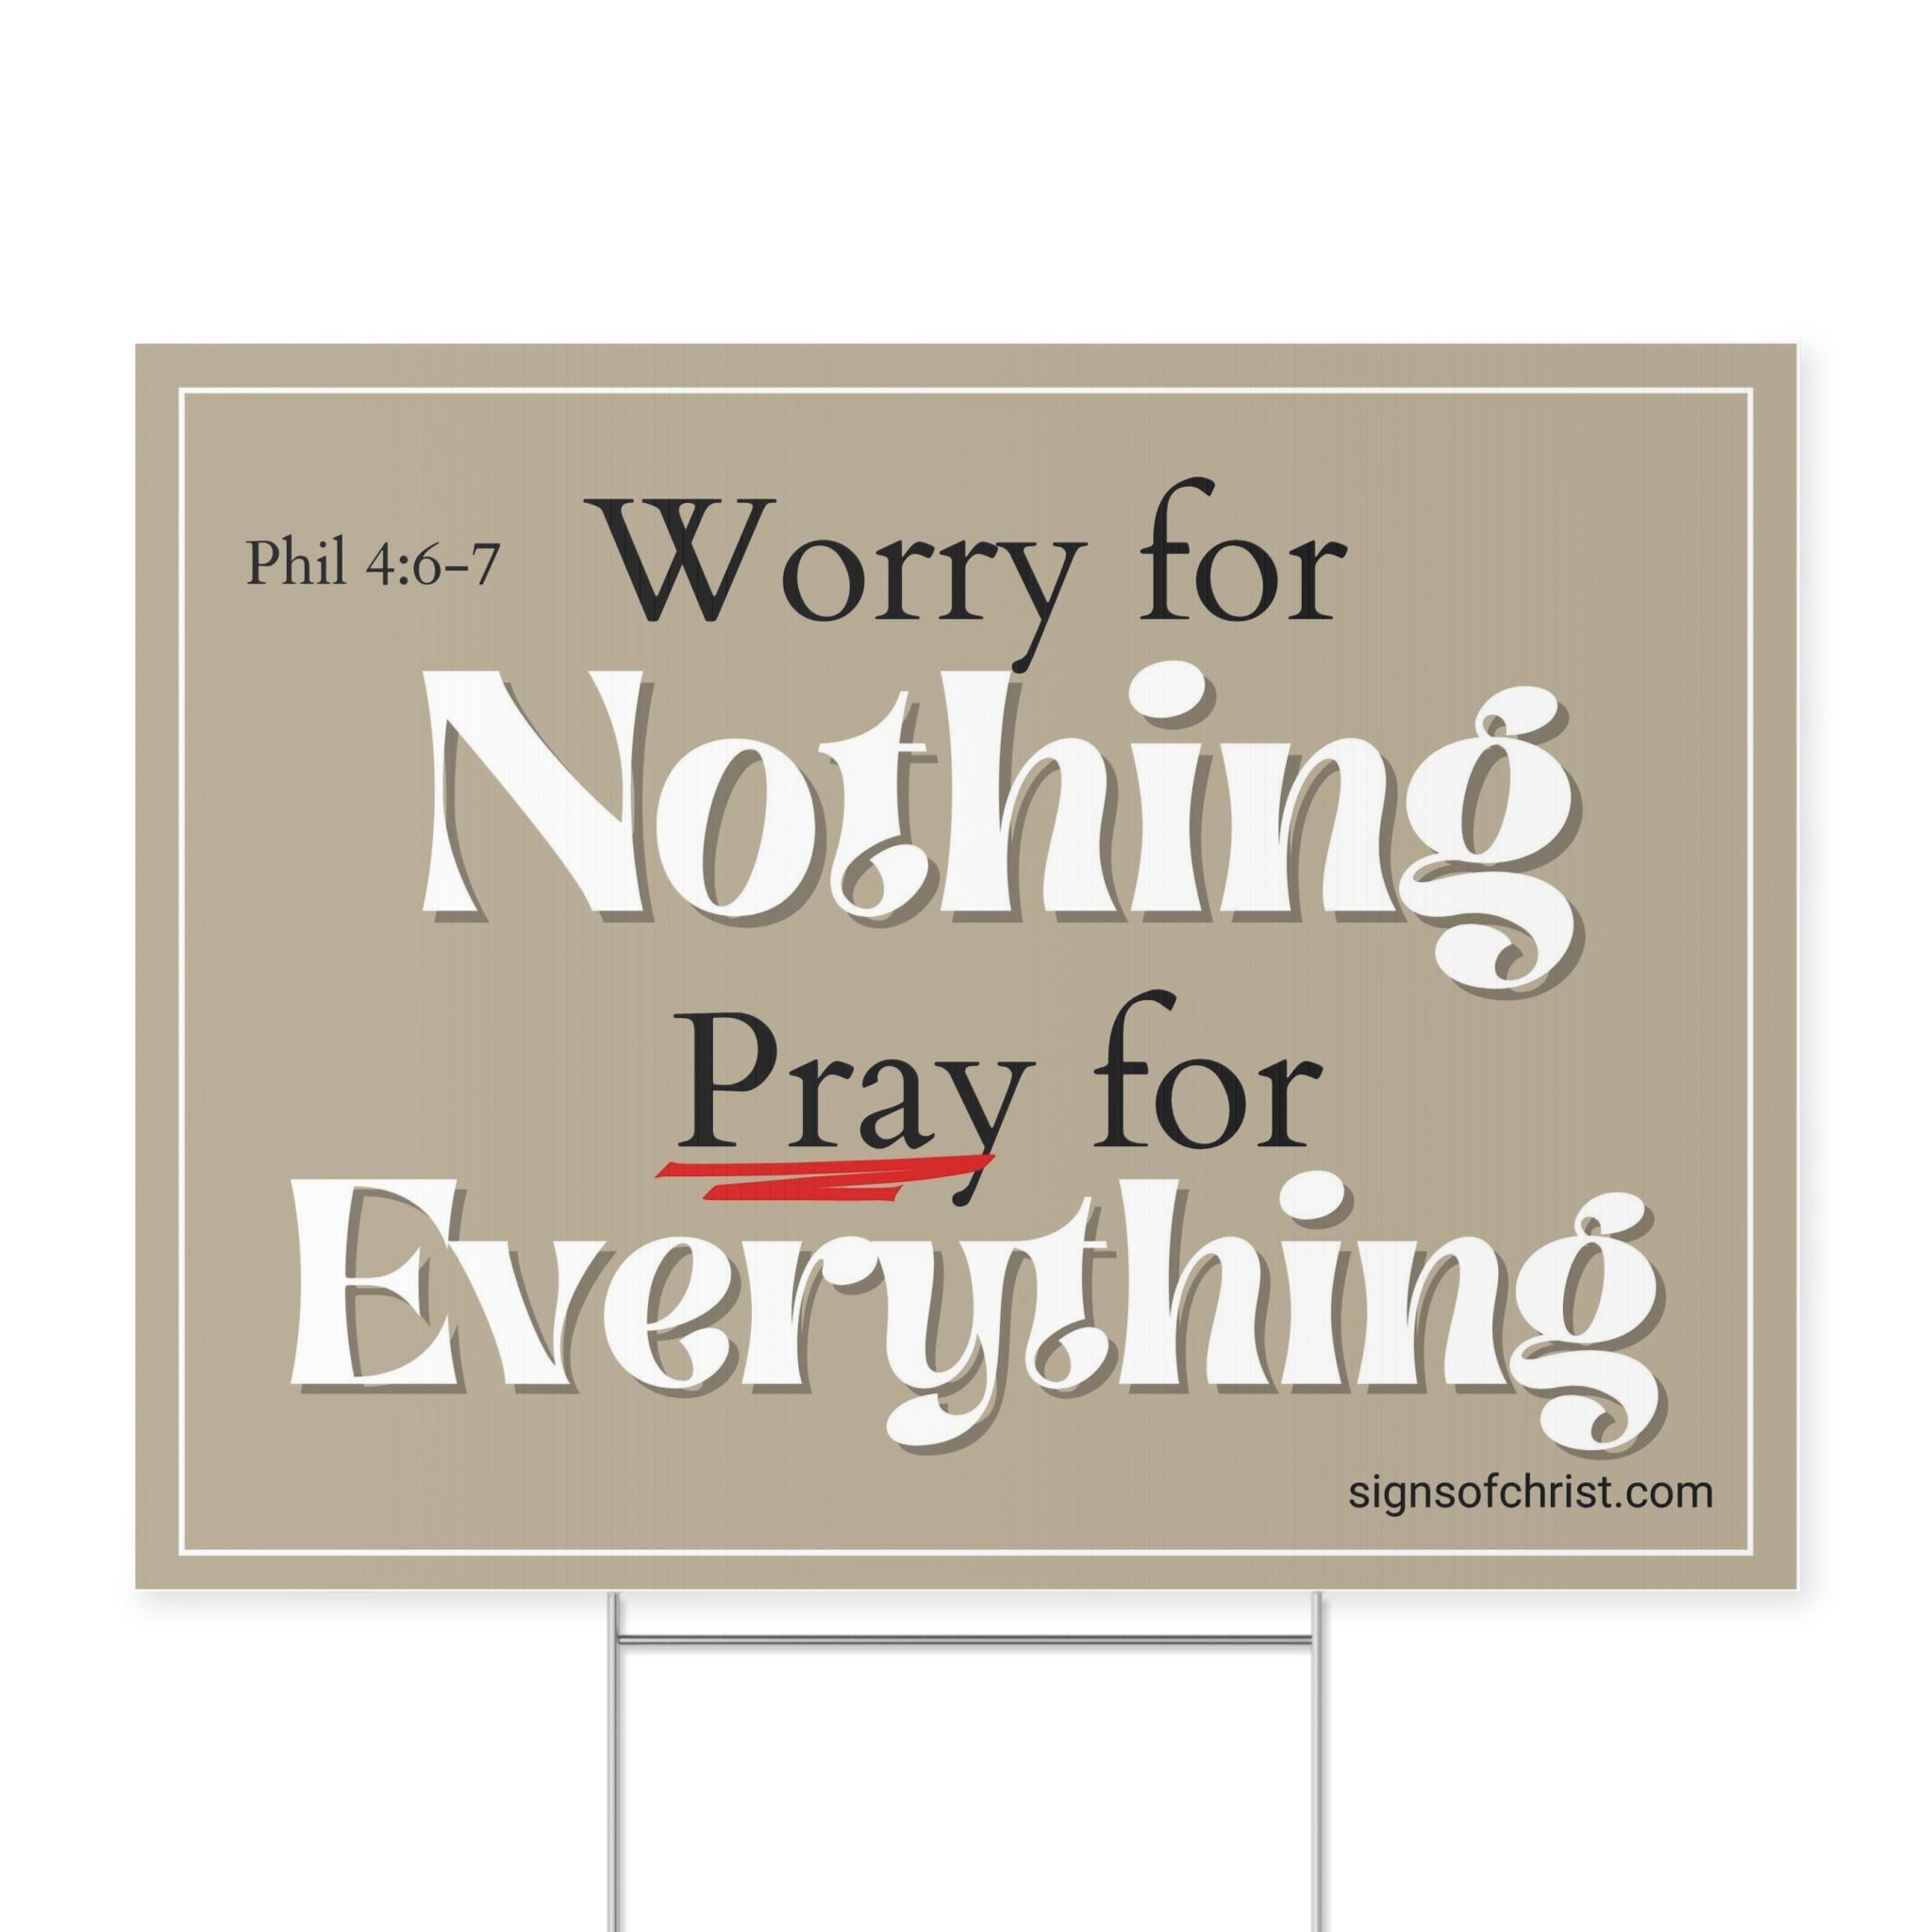 Worry for nothing Pray for everything